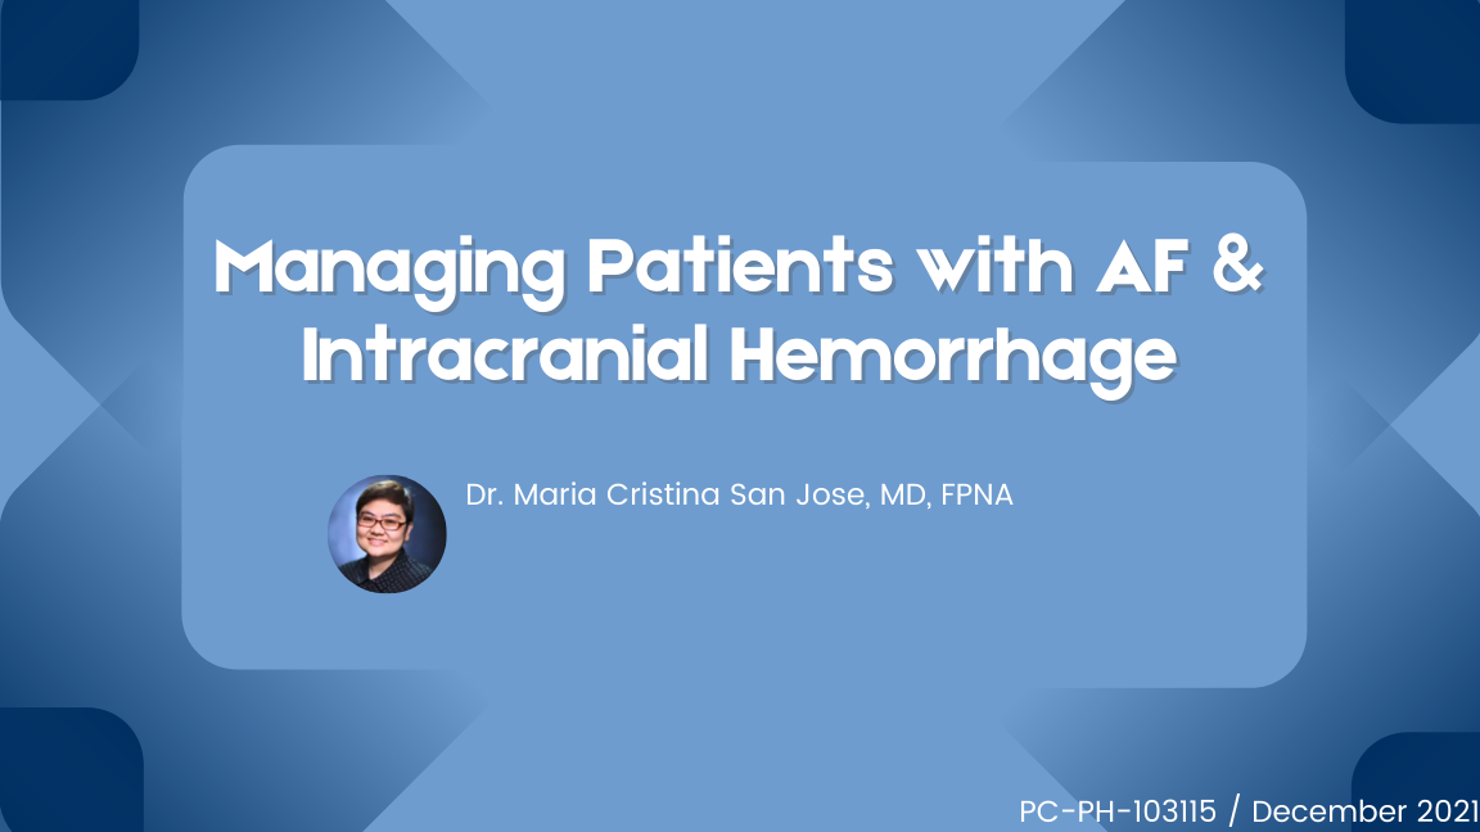 Managing Patients with AF & Intracranial Hemorrhage